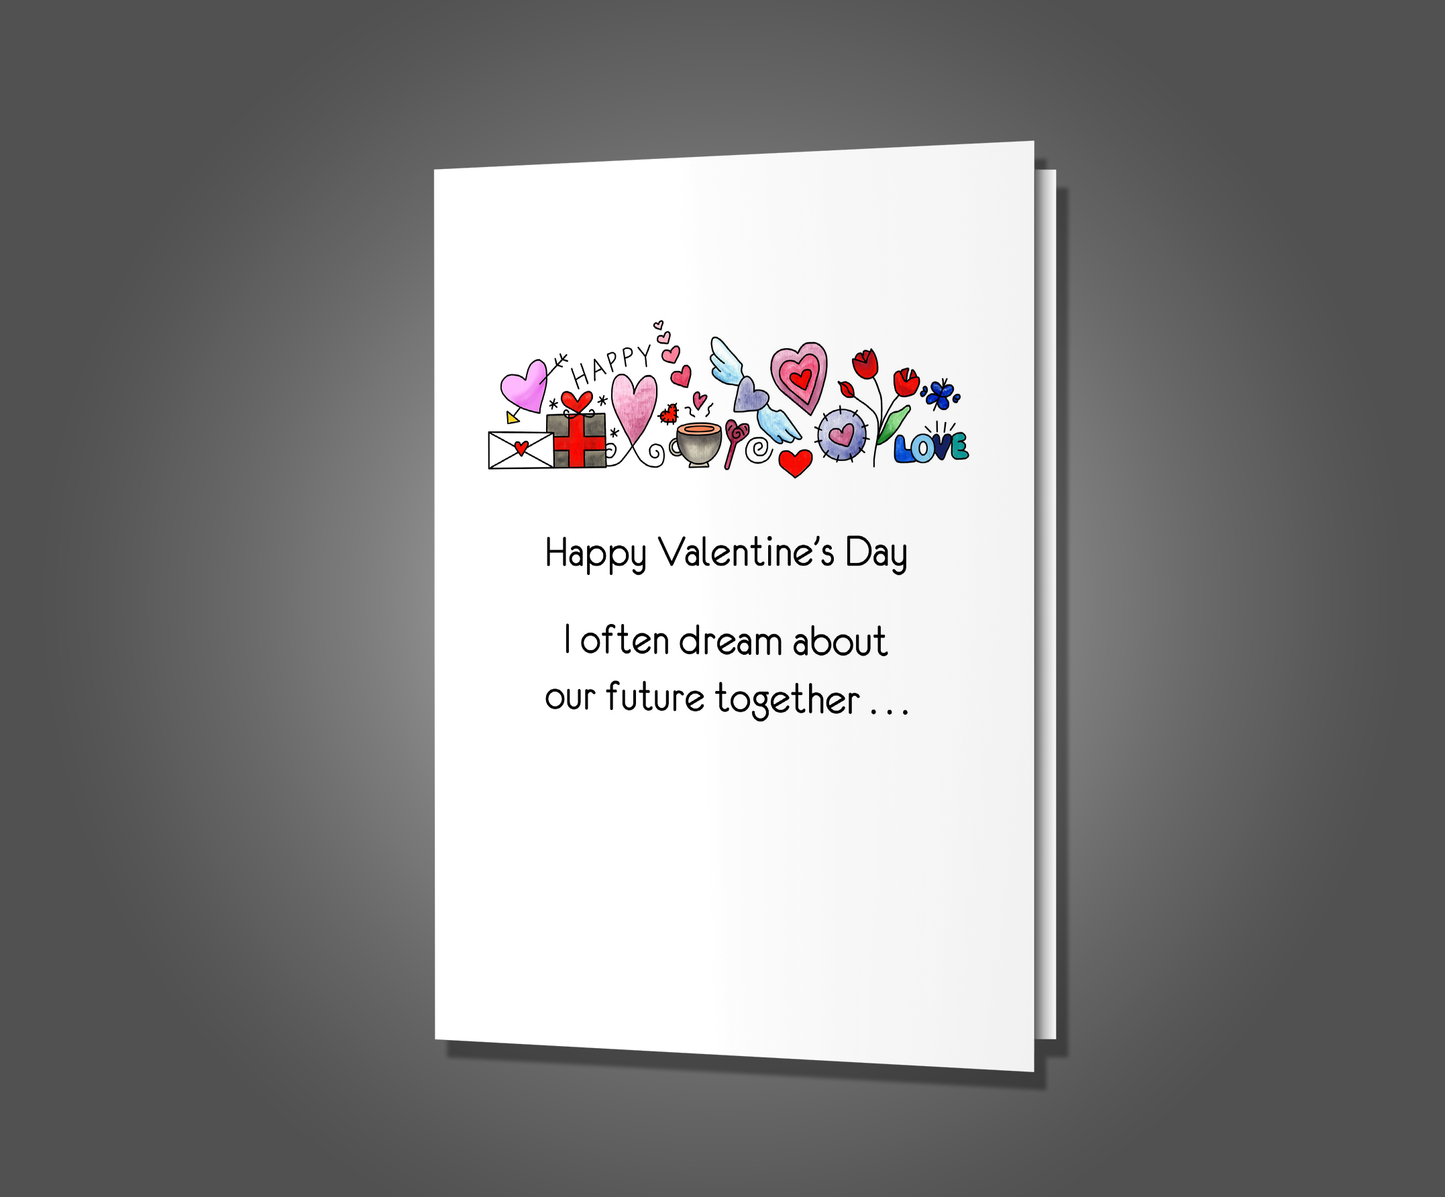 Shit on Your Grave, Valentine's Day Card